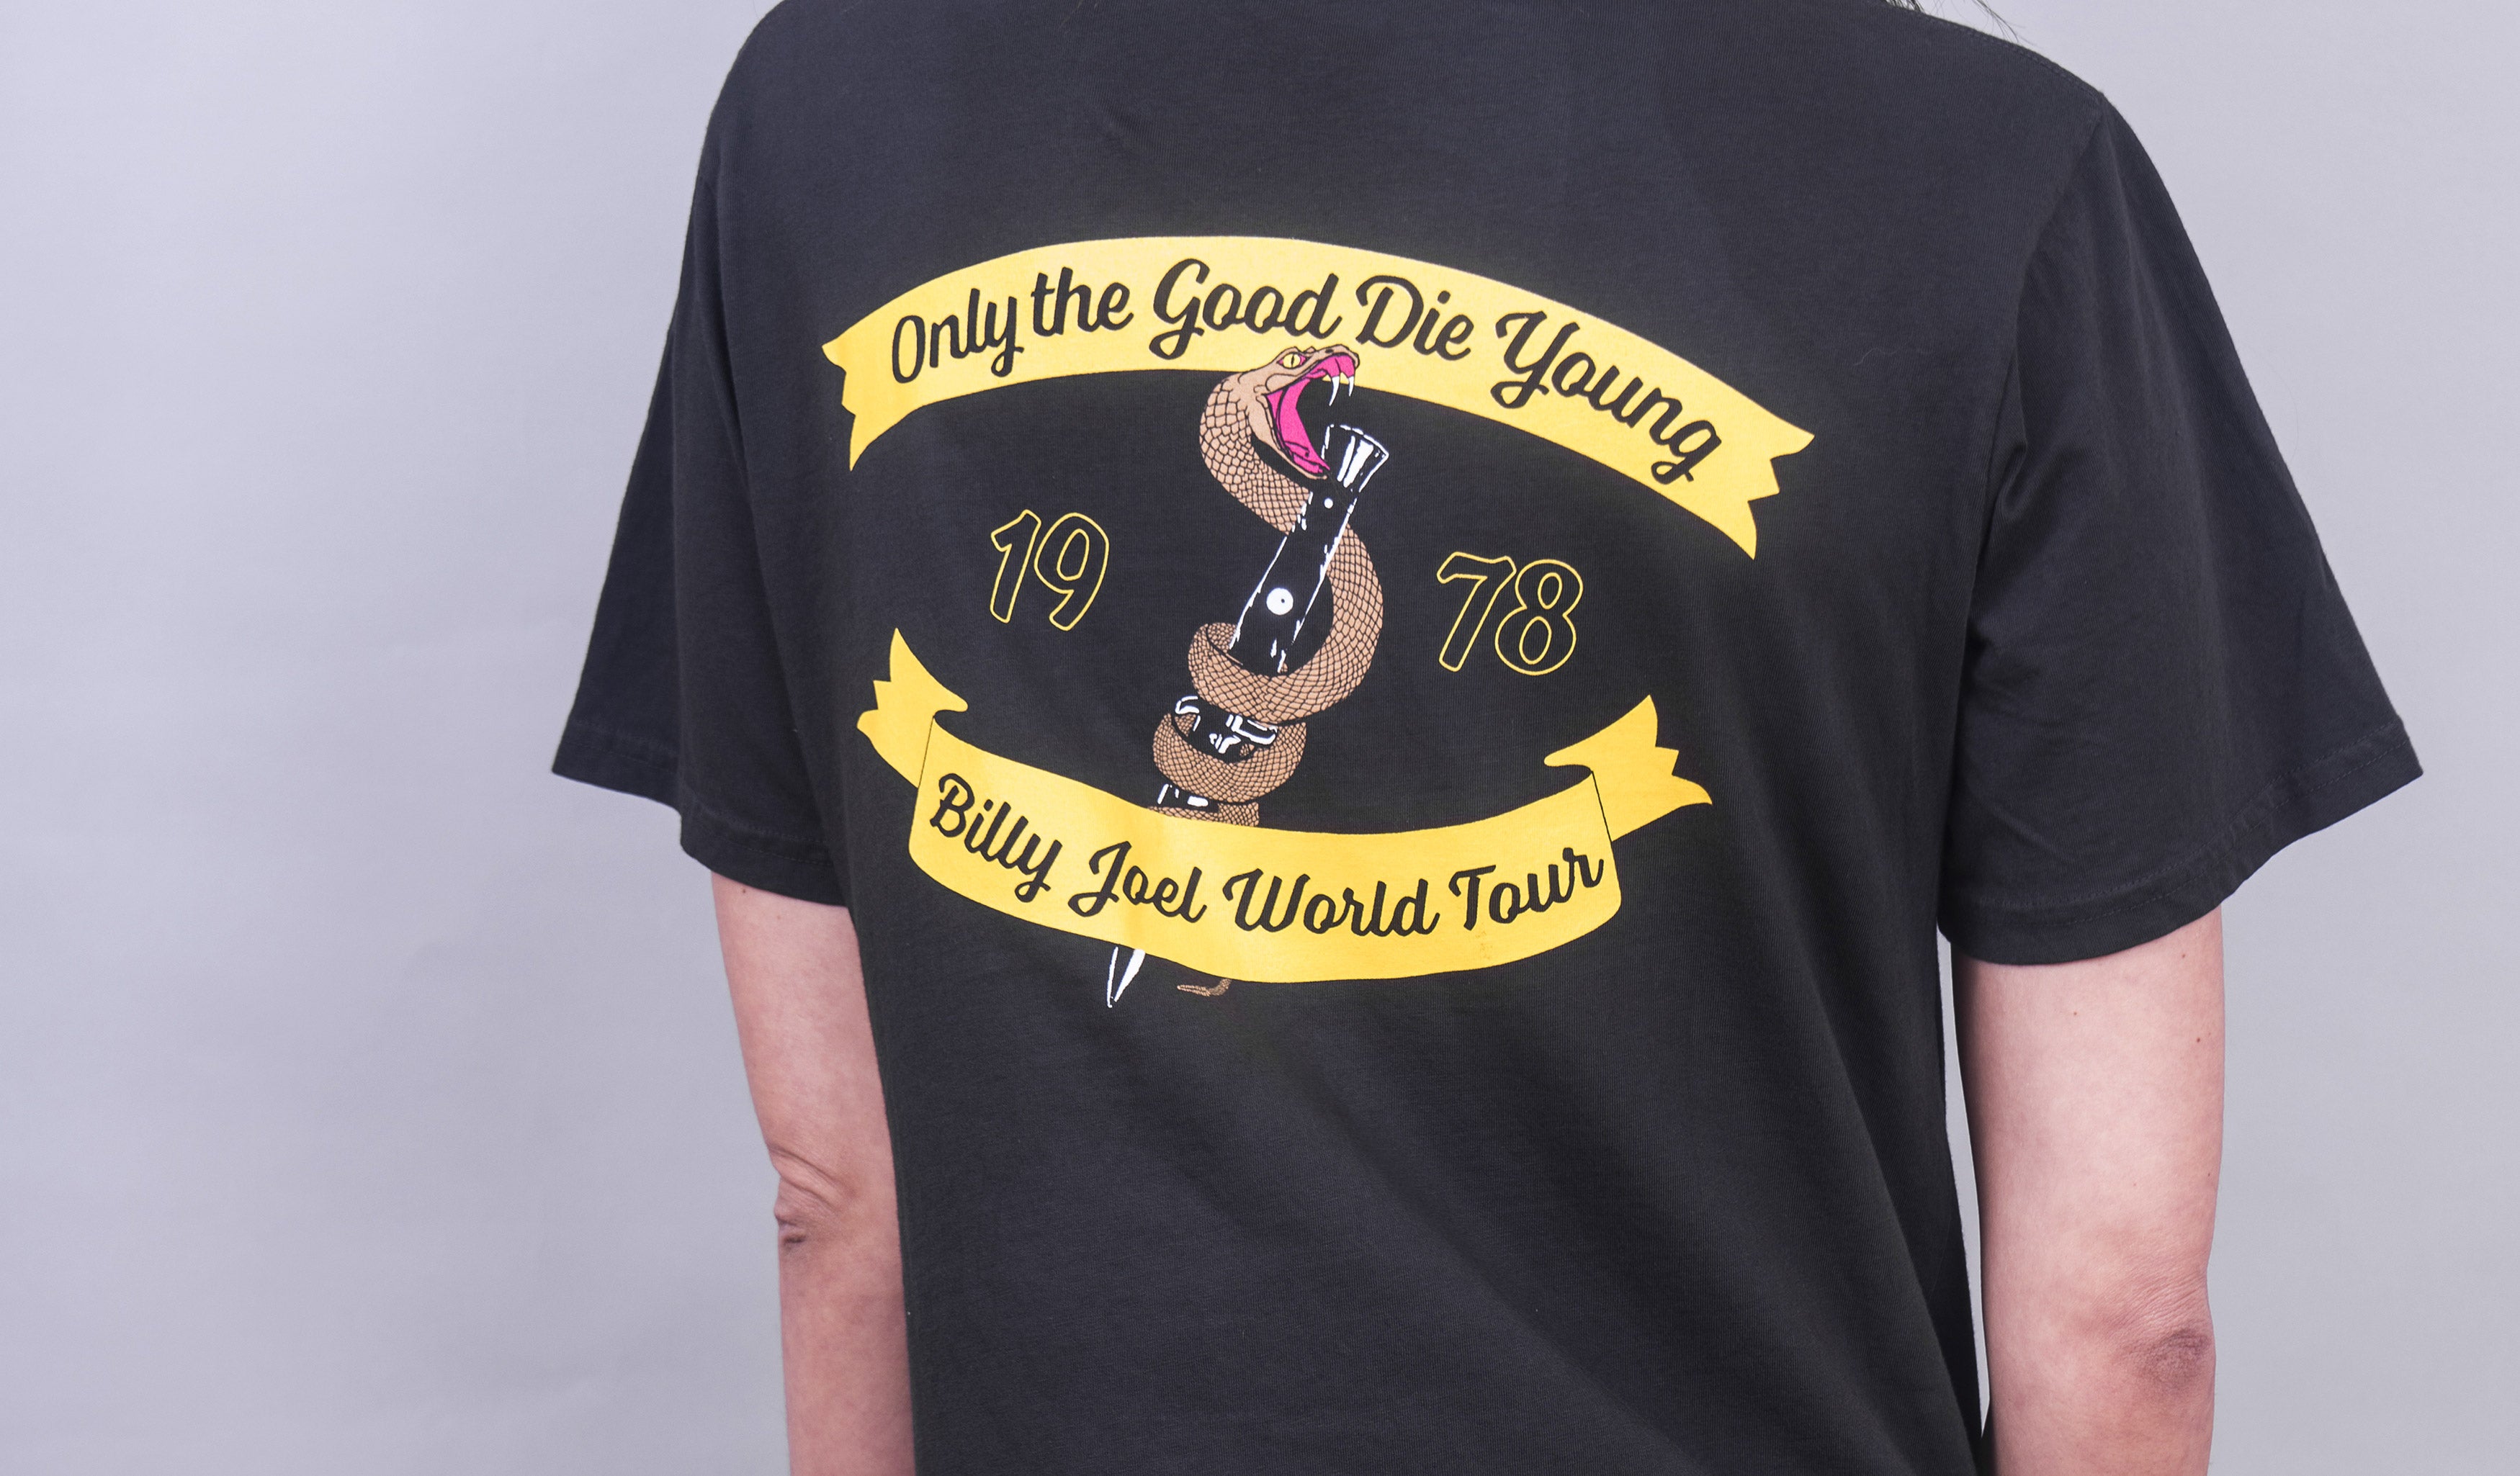 Only The Good Die Young (Vintage Black)